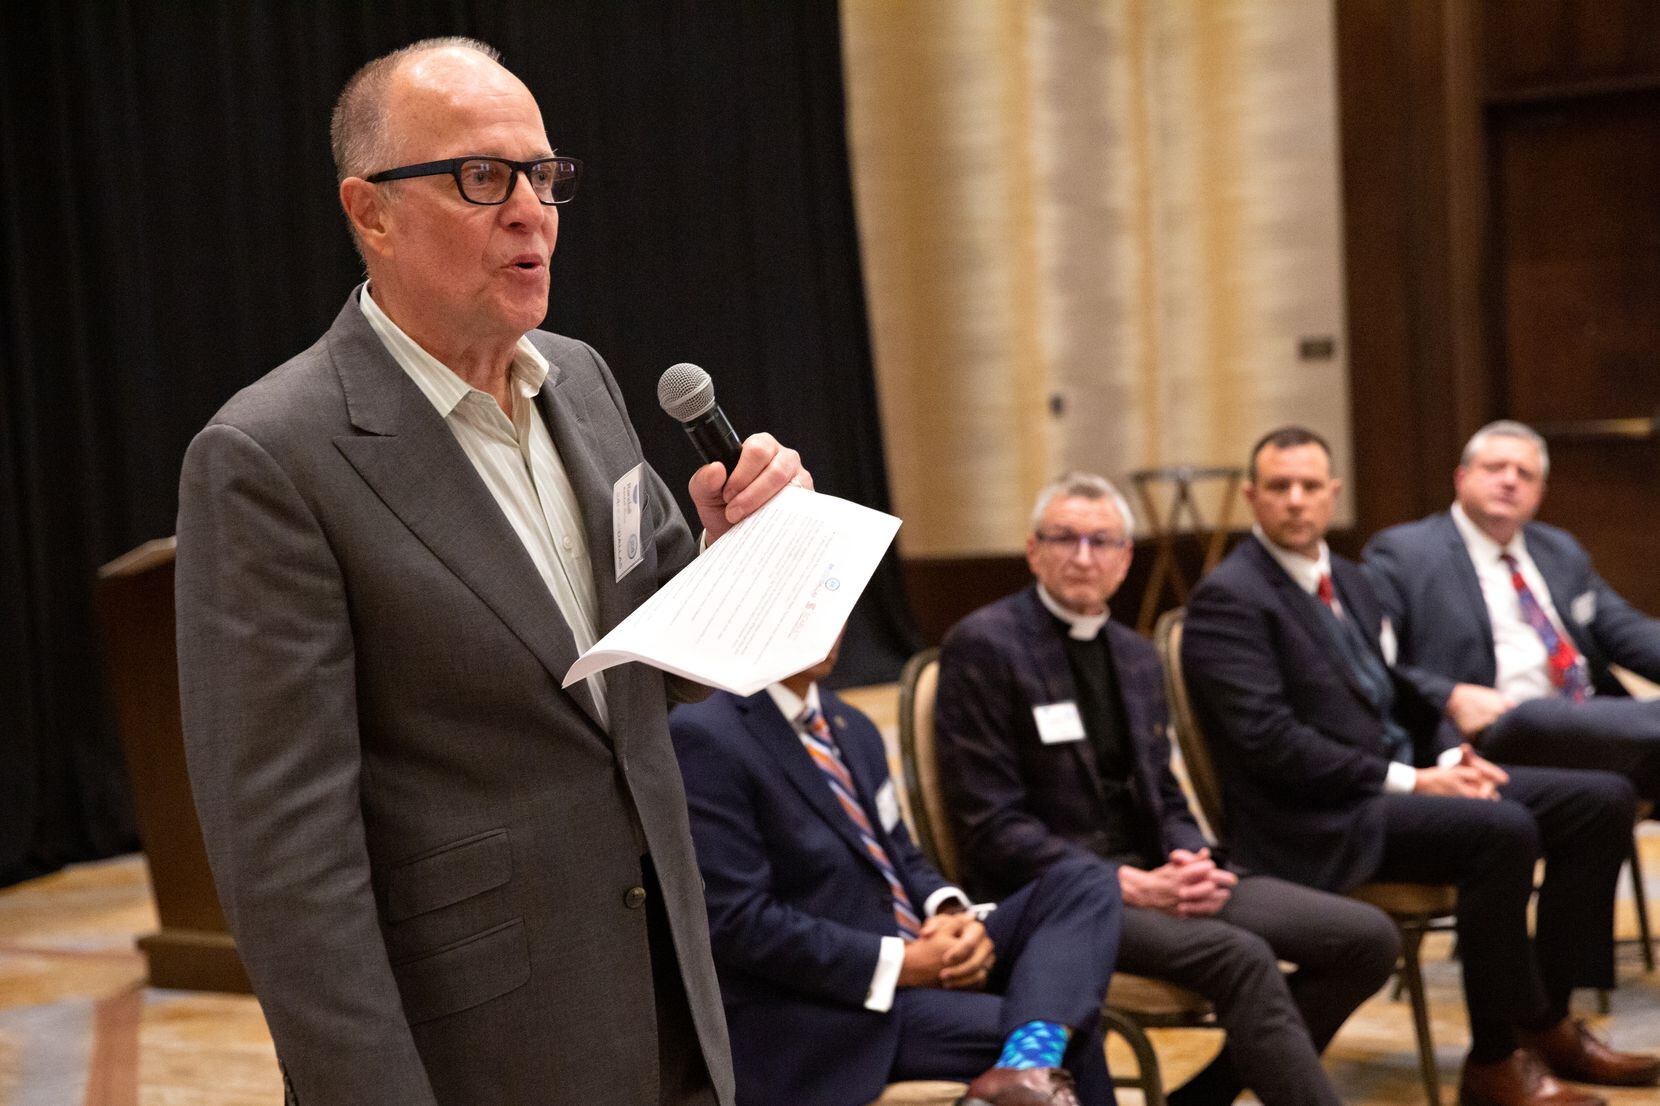 Randall White, founder and president of 24HourDallas, on Dec. 7 hosted a roundtable at the Omni Hotel in Dallas during which the nonprofit unveiled its new Good Neighbor Initiative. The program aims to partner restaurants and bars with police and other city agencies to improve public safety.